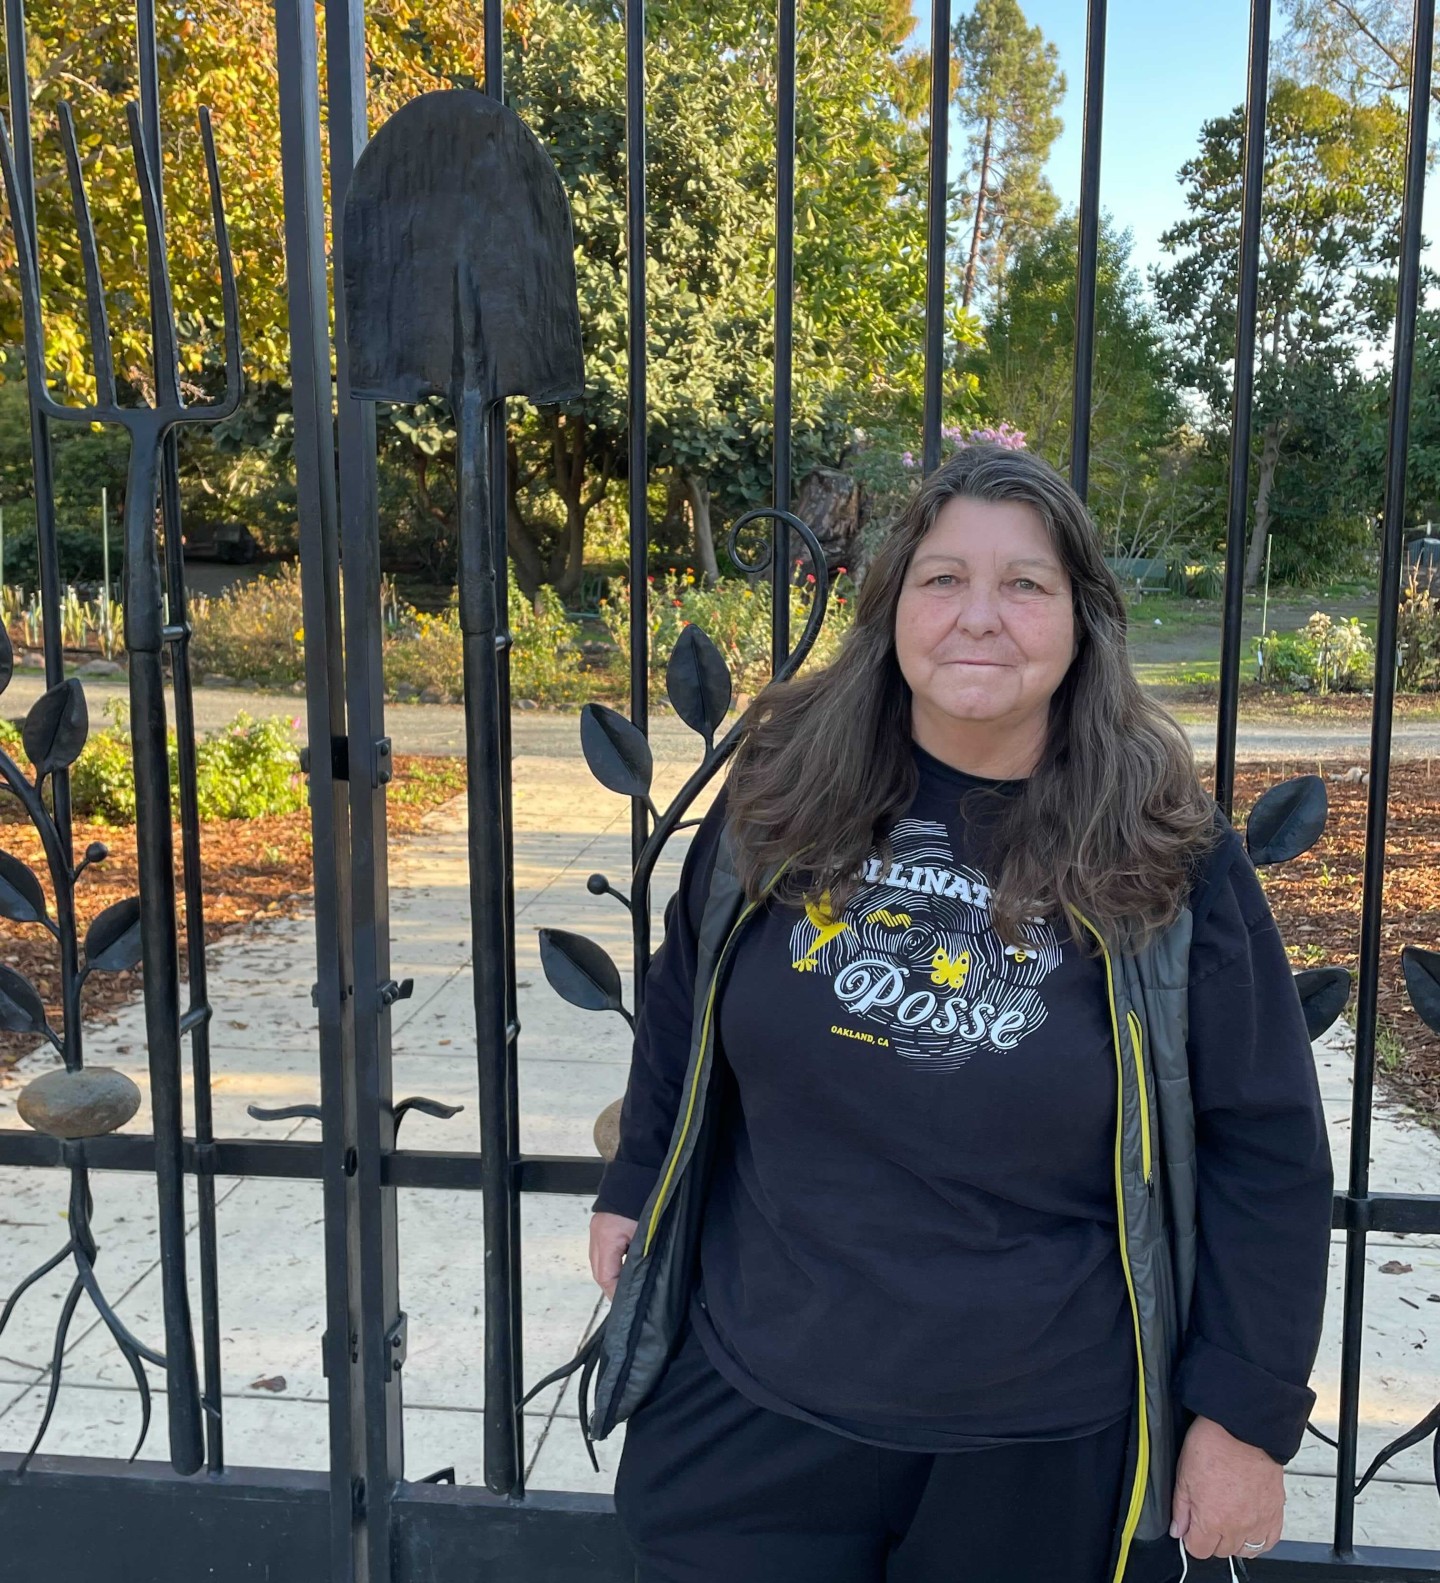 A woman dressed in a shirt that says Polinator Posse on it stands in front of ornate iron gates leading to a garden.